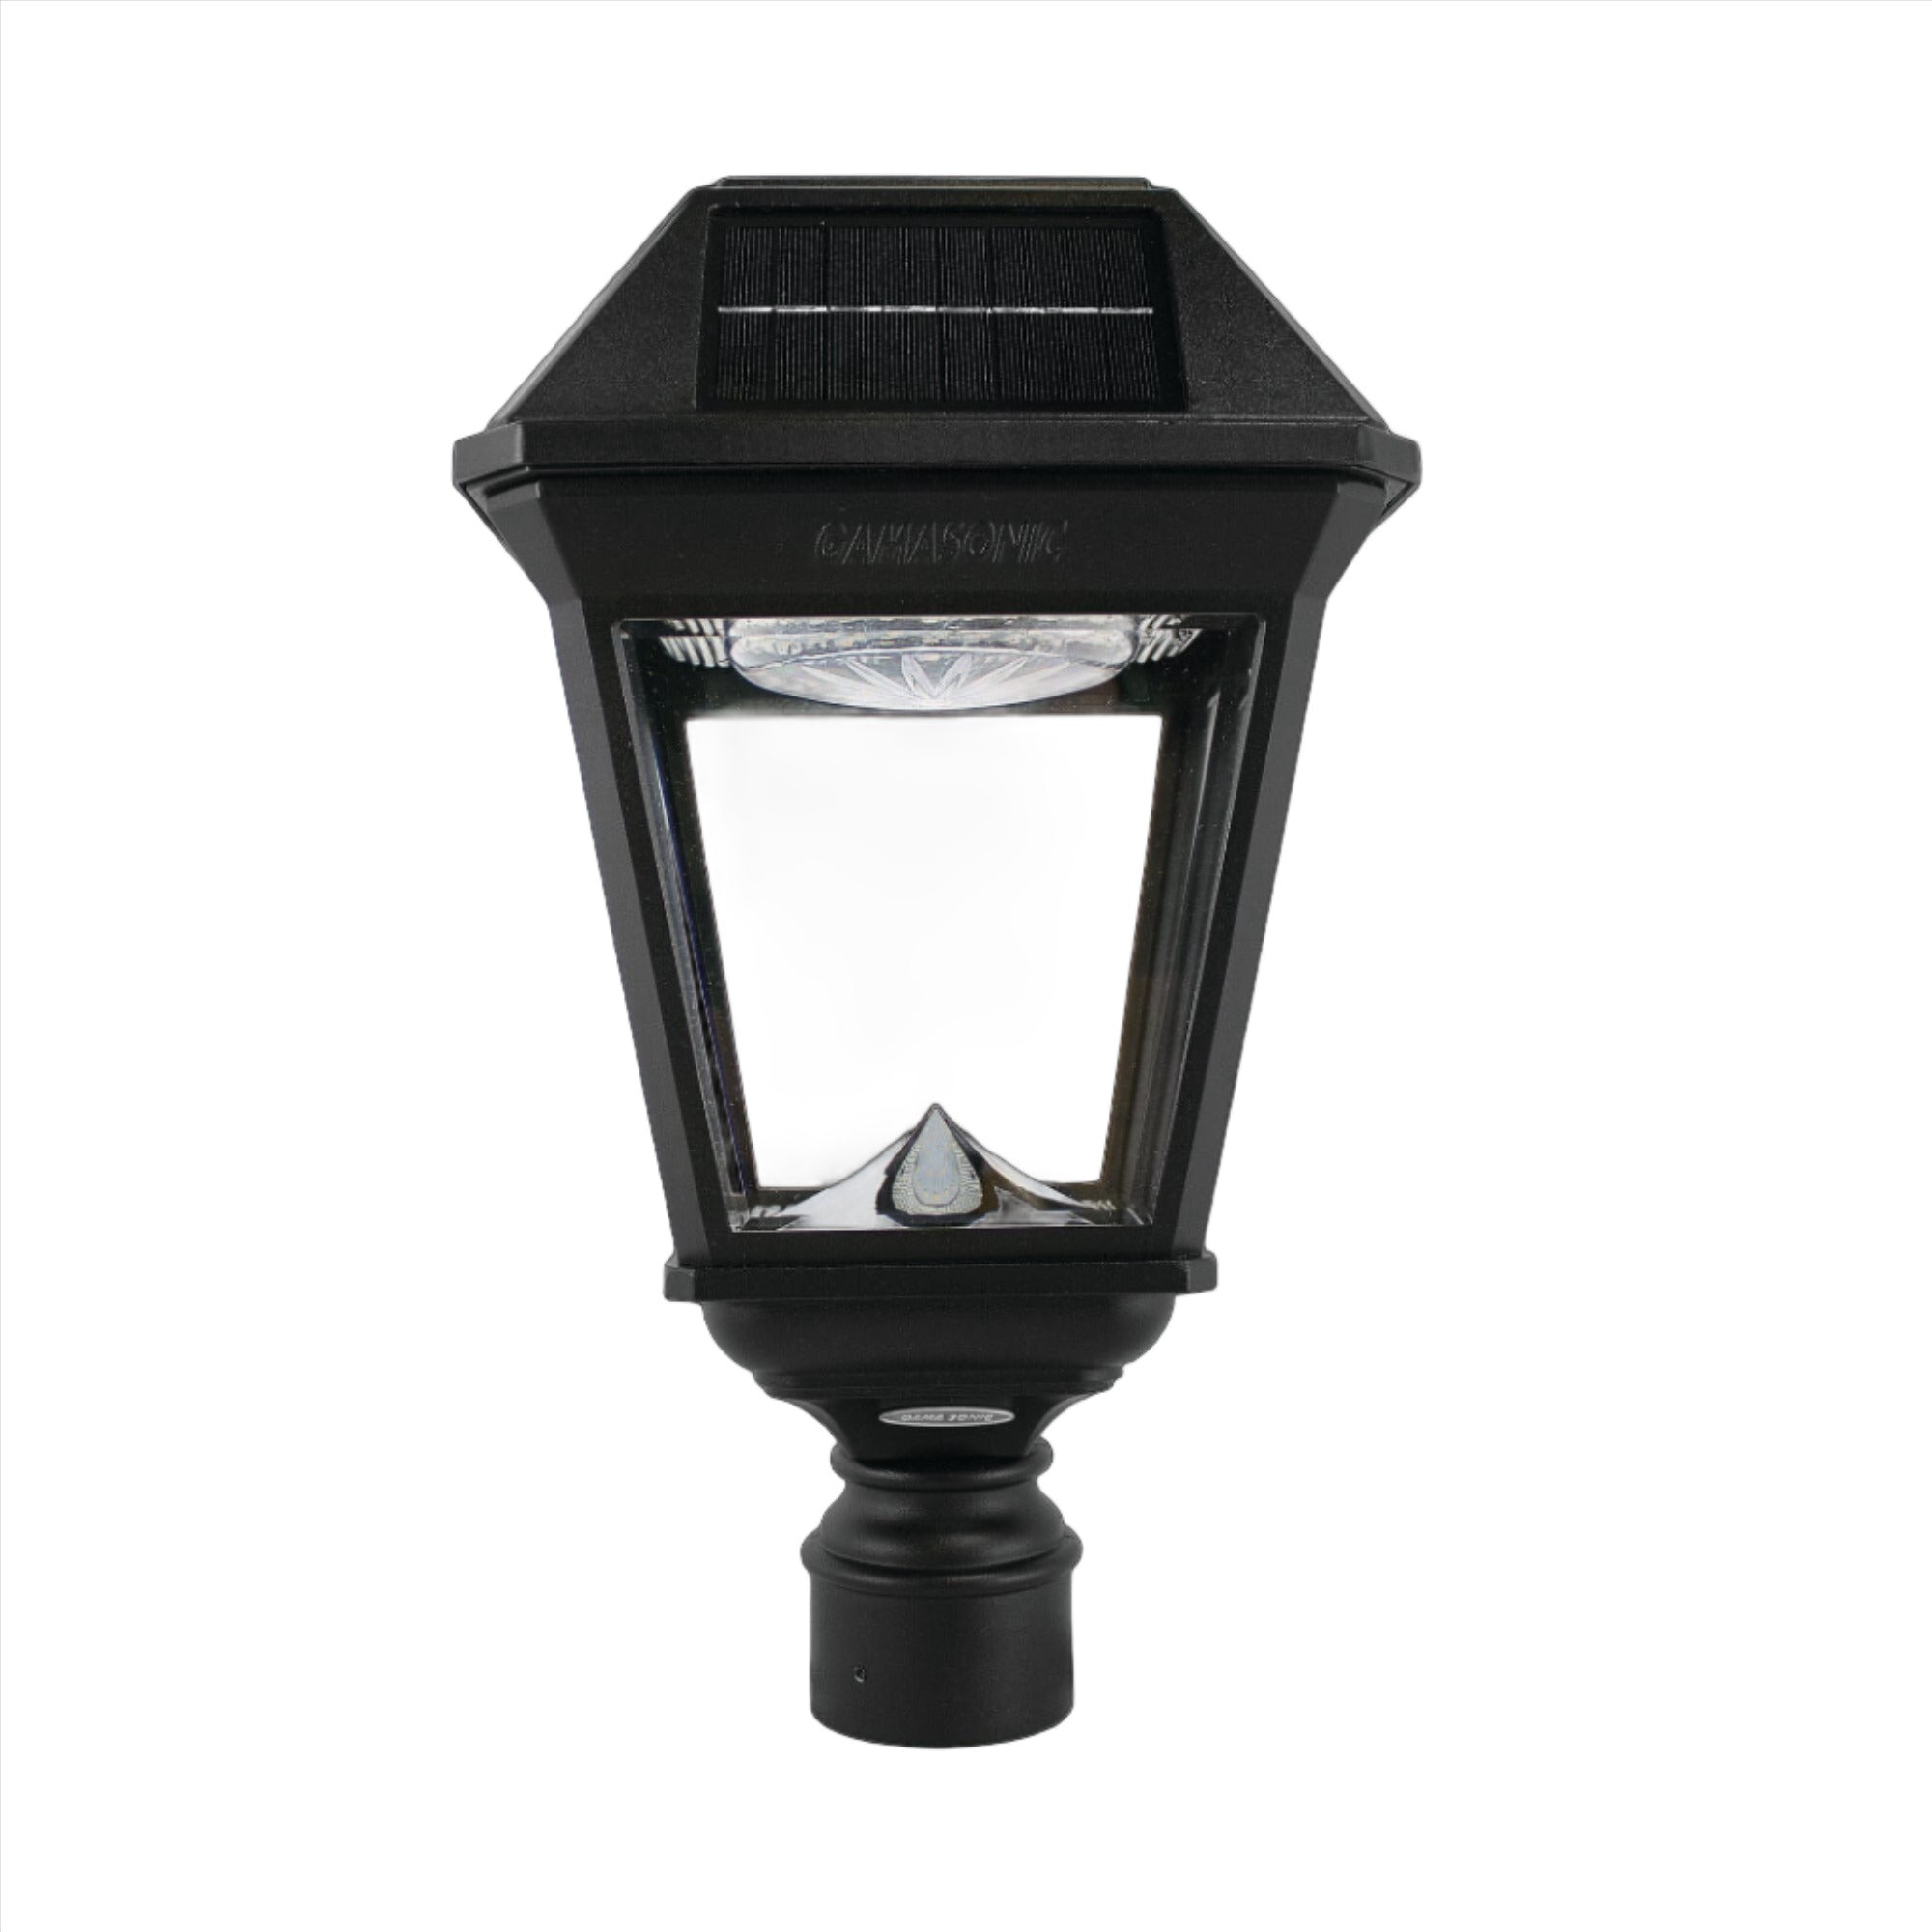 Imperial III Solar Lamp | Bright & Warm White in One